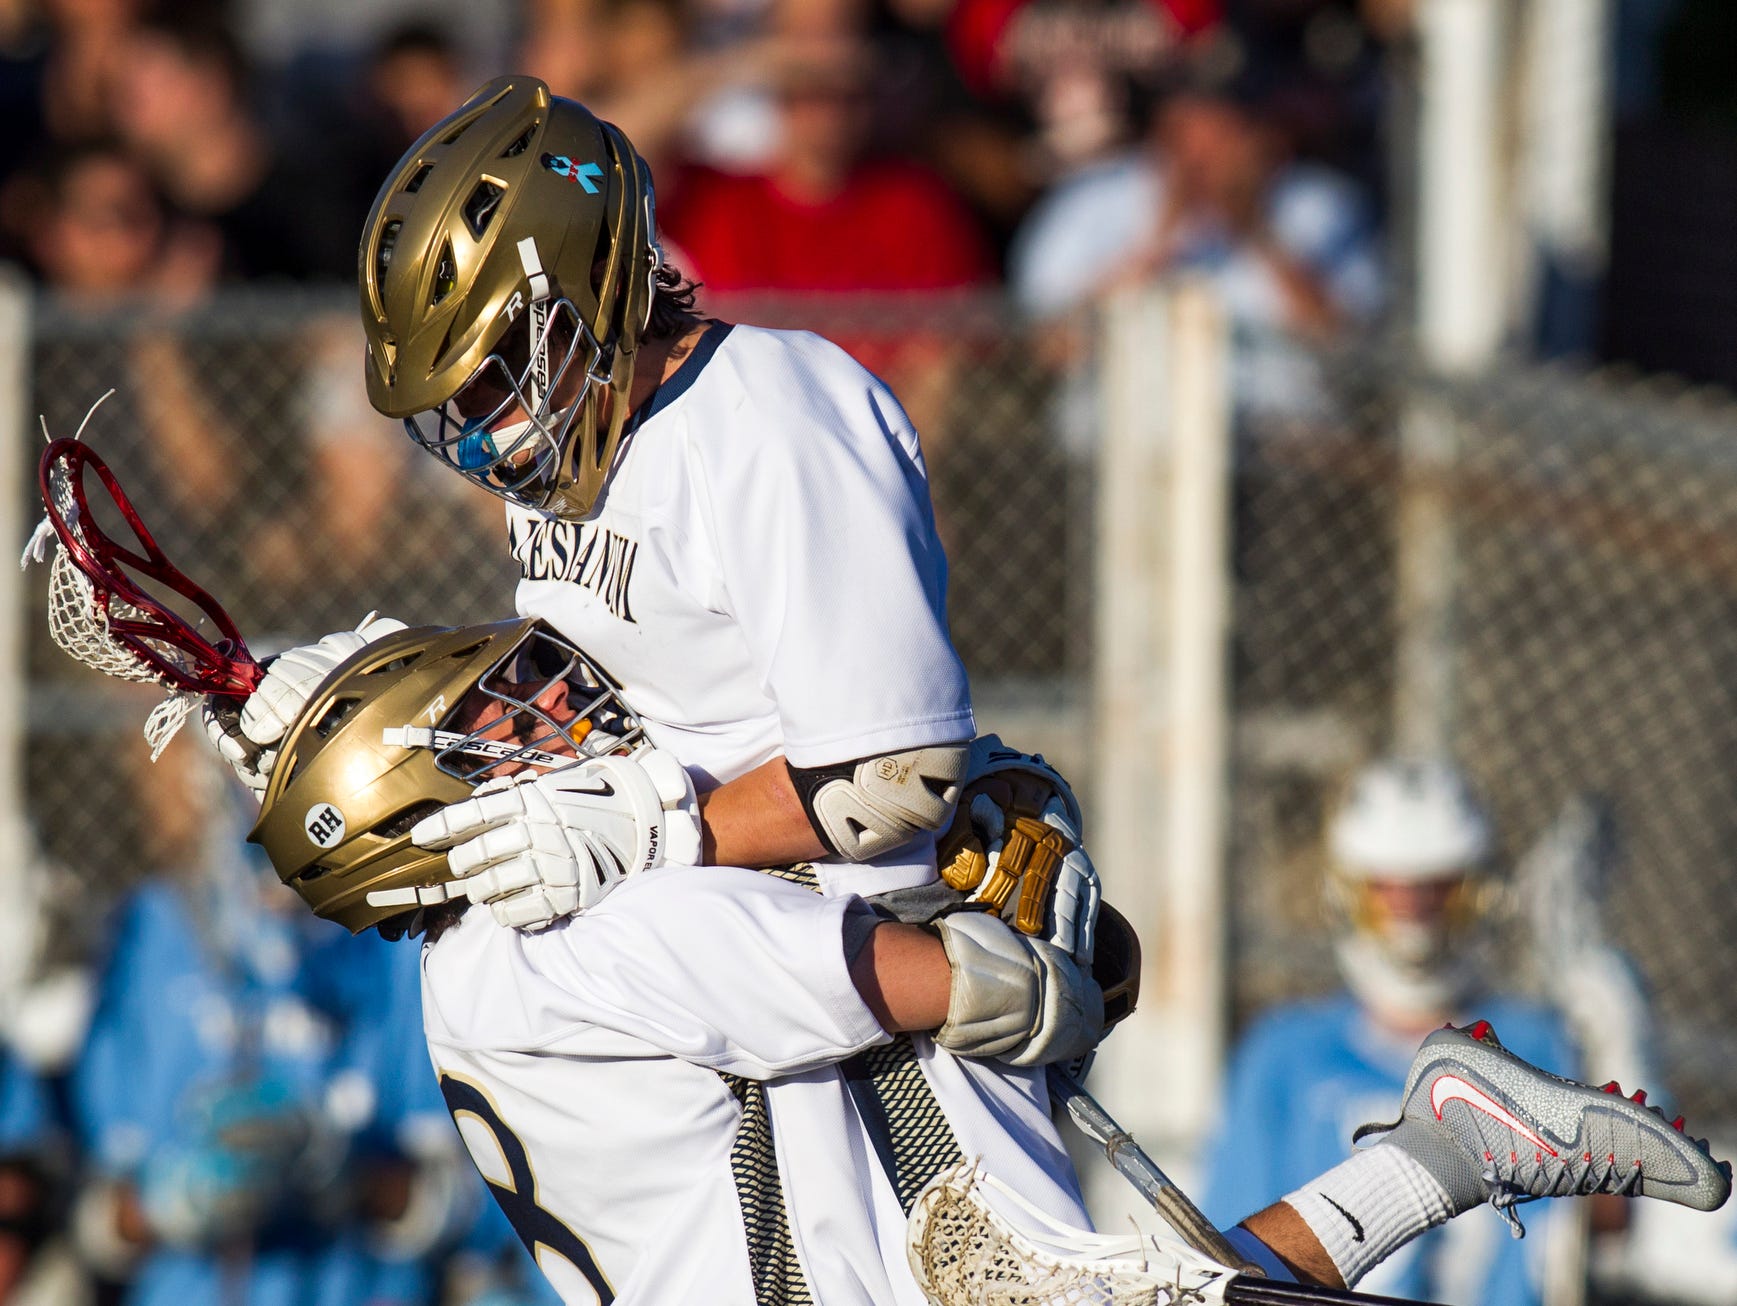 Salesianum's Michael Drake leaps into the arms of teammate Michael Sanzone after scoring a goal in the first half of the DIAA Boys Lacrosse Championship game at Caravel Academy on Saturday night. Salesianum defeated Cape Henlopen by a score of 16-5.